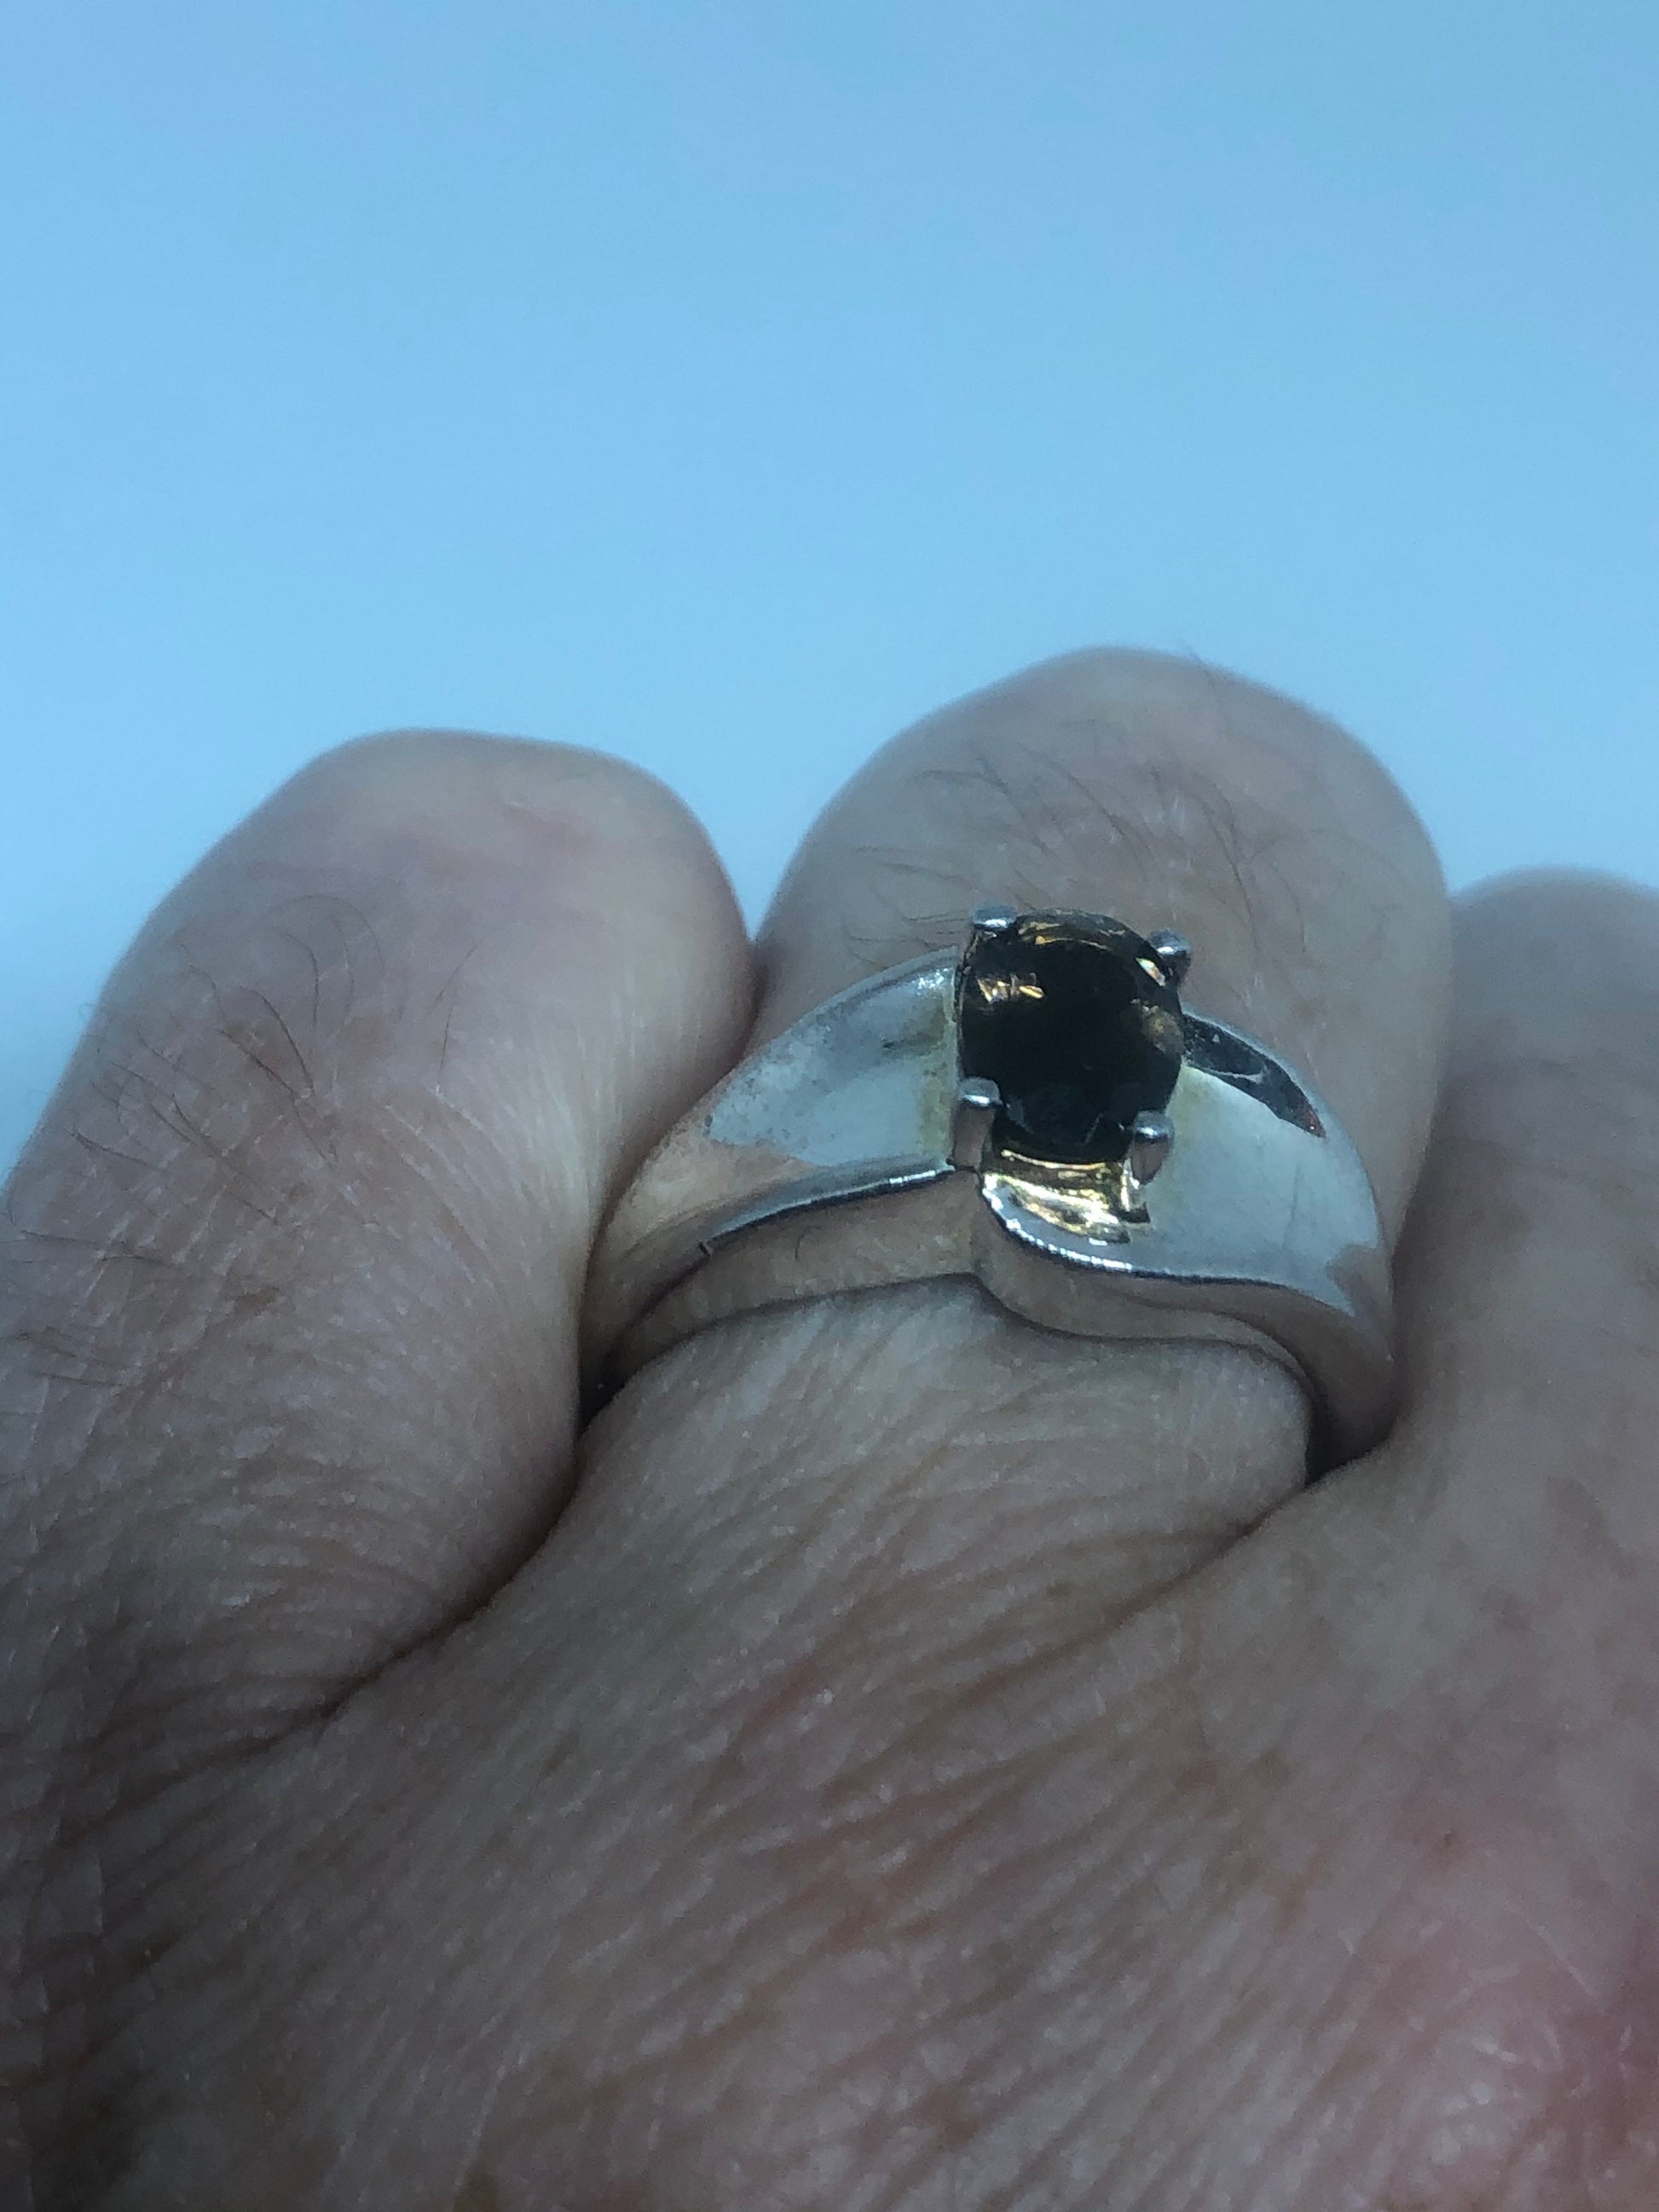 Vintage Smoky Topaz Setting 925 Sterling Silver Gothic Ring